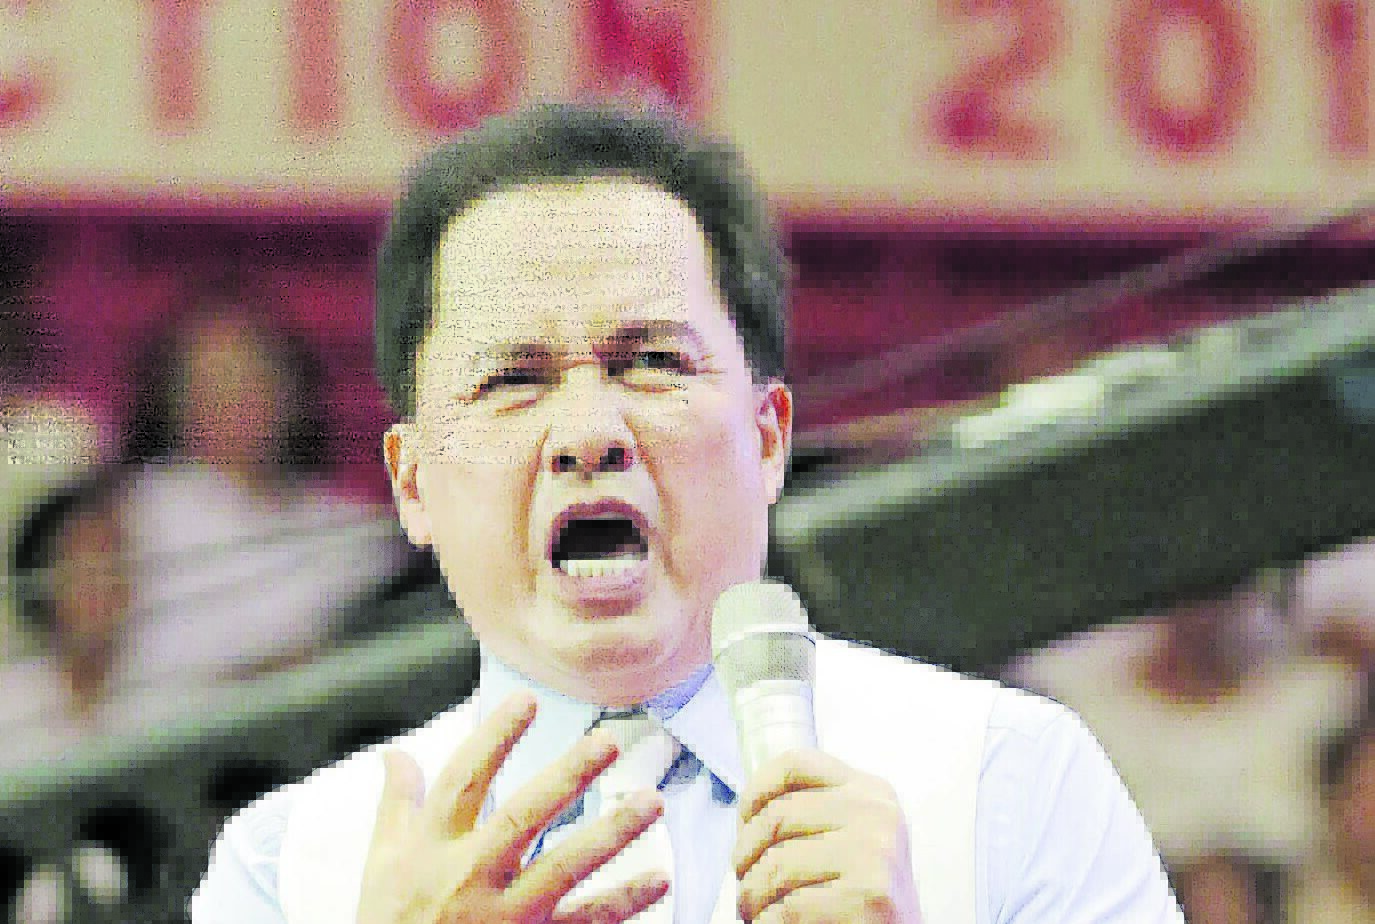 Quiboloy sexual abuse case ordered transferred from Davao to QC